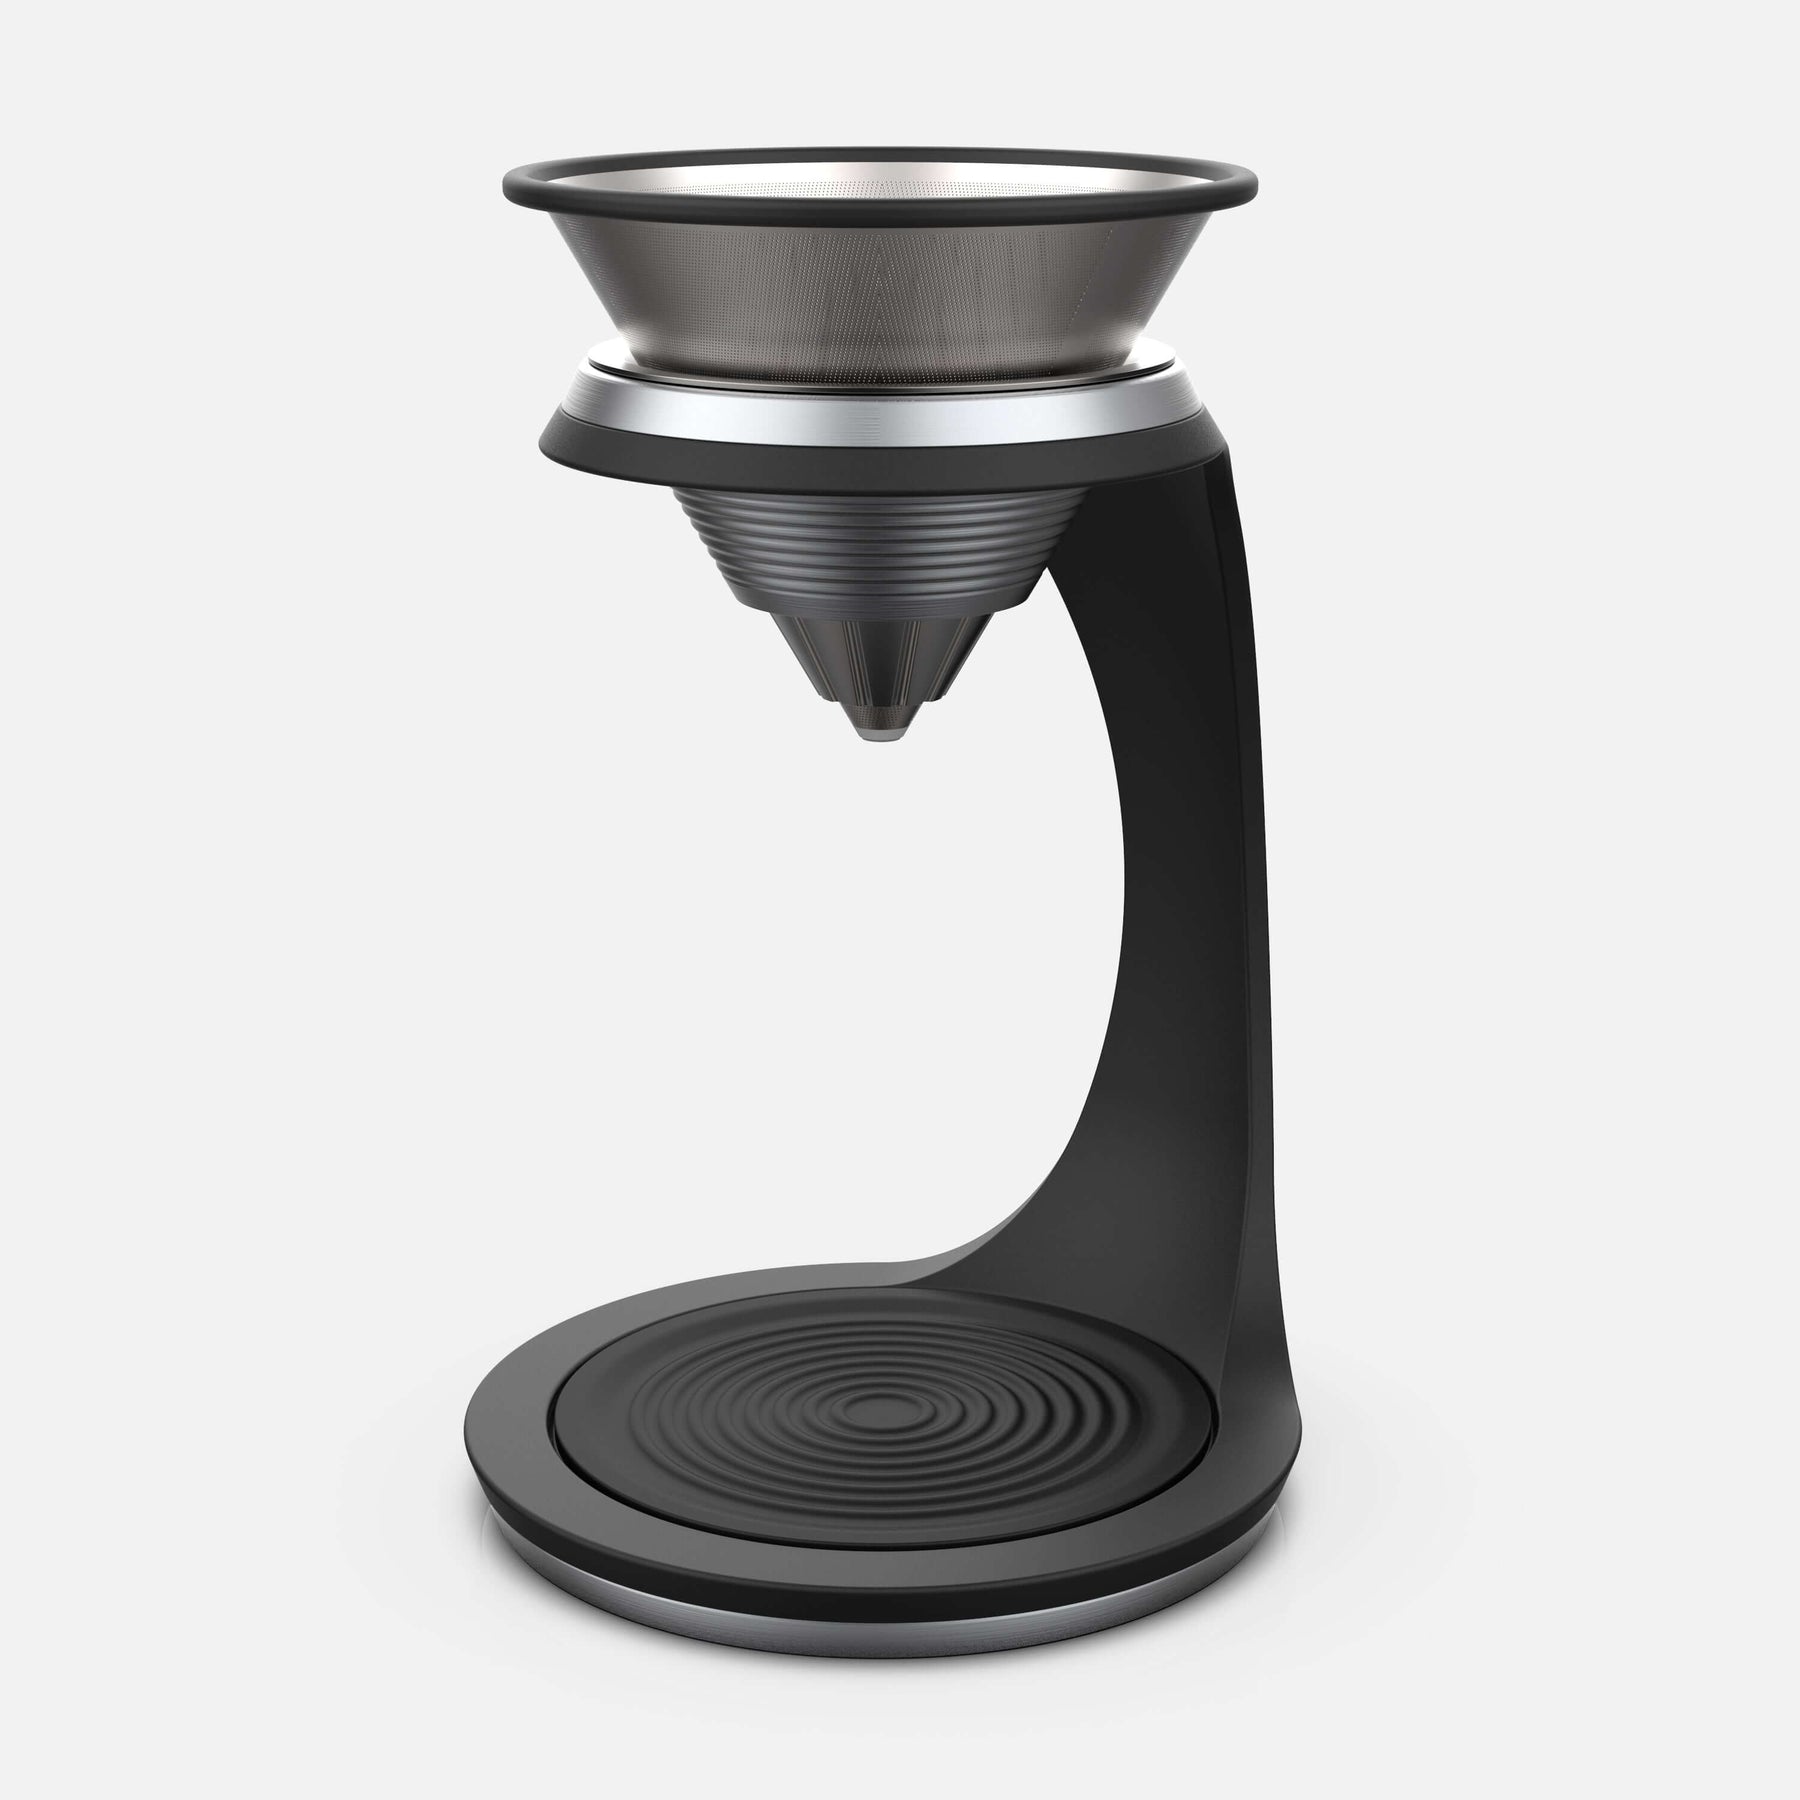 O-LYFE - Drip - Pour Over / Slow / Dripping Coffee Stand Black